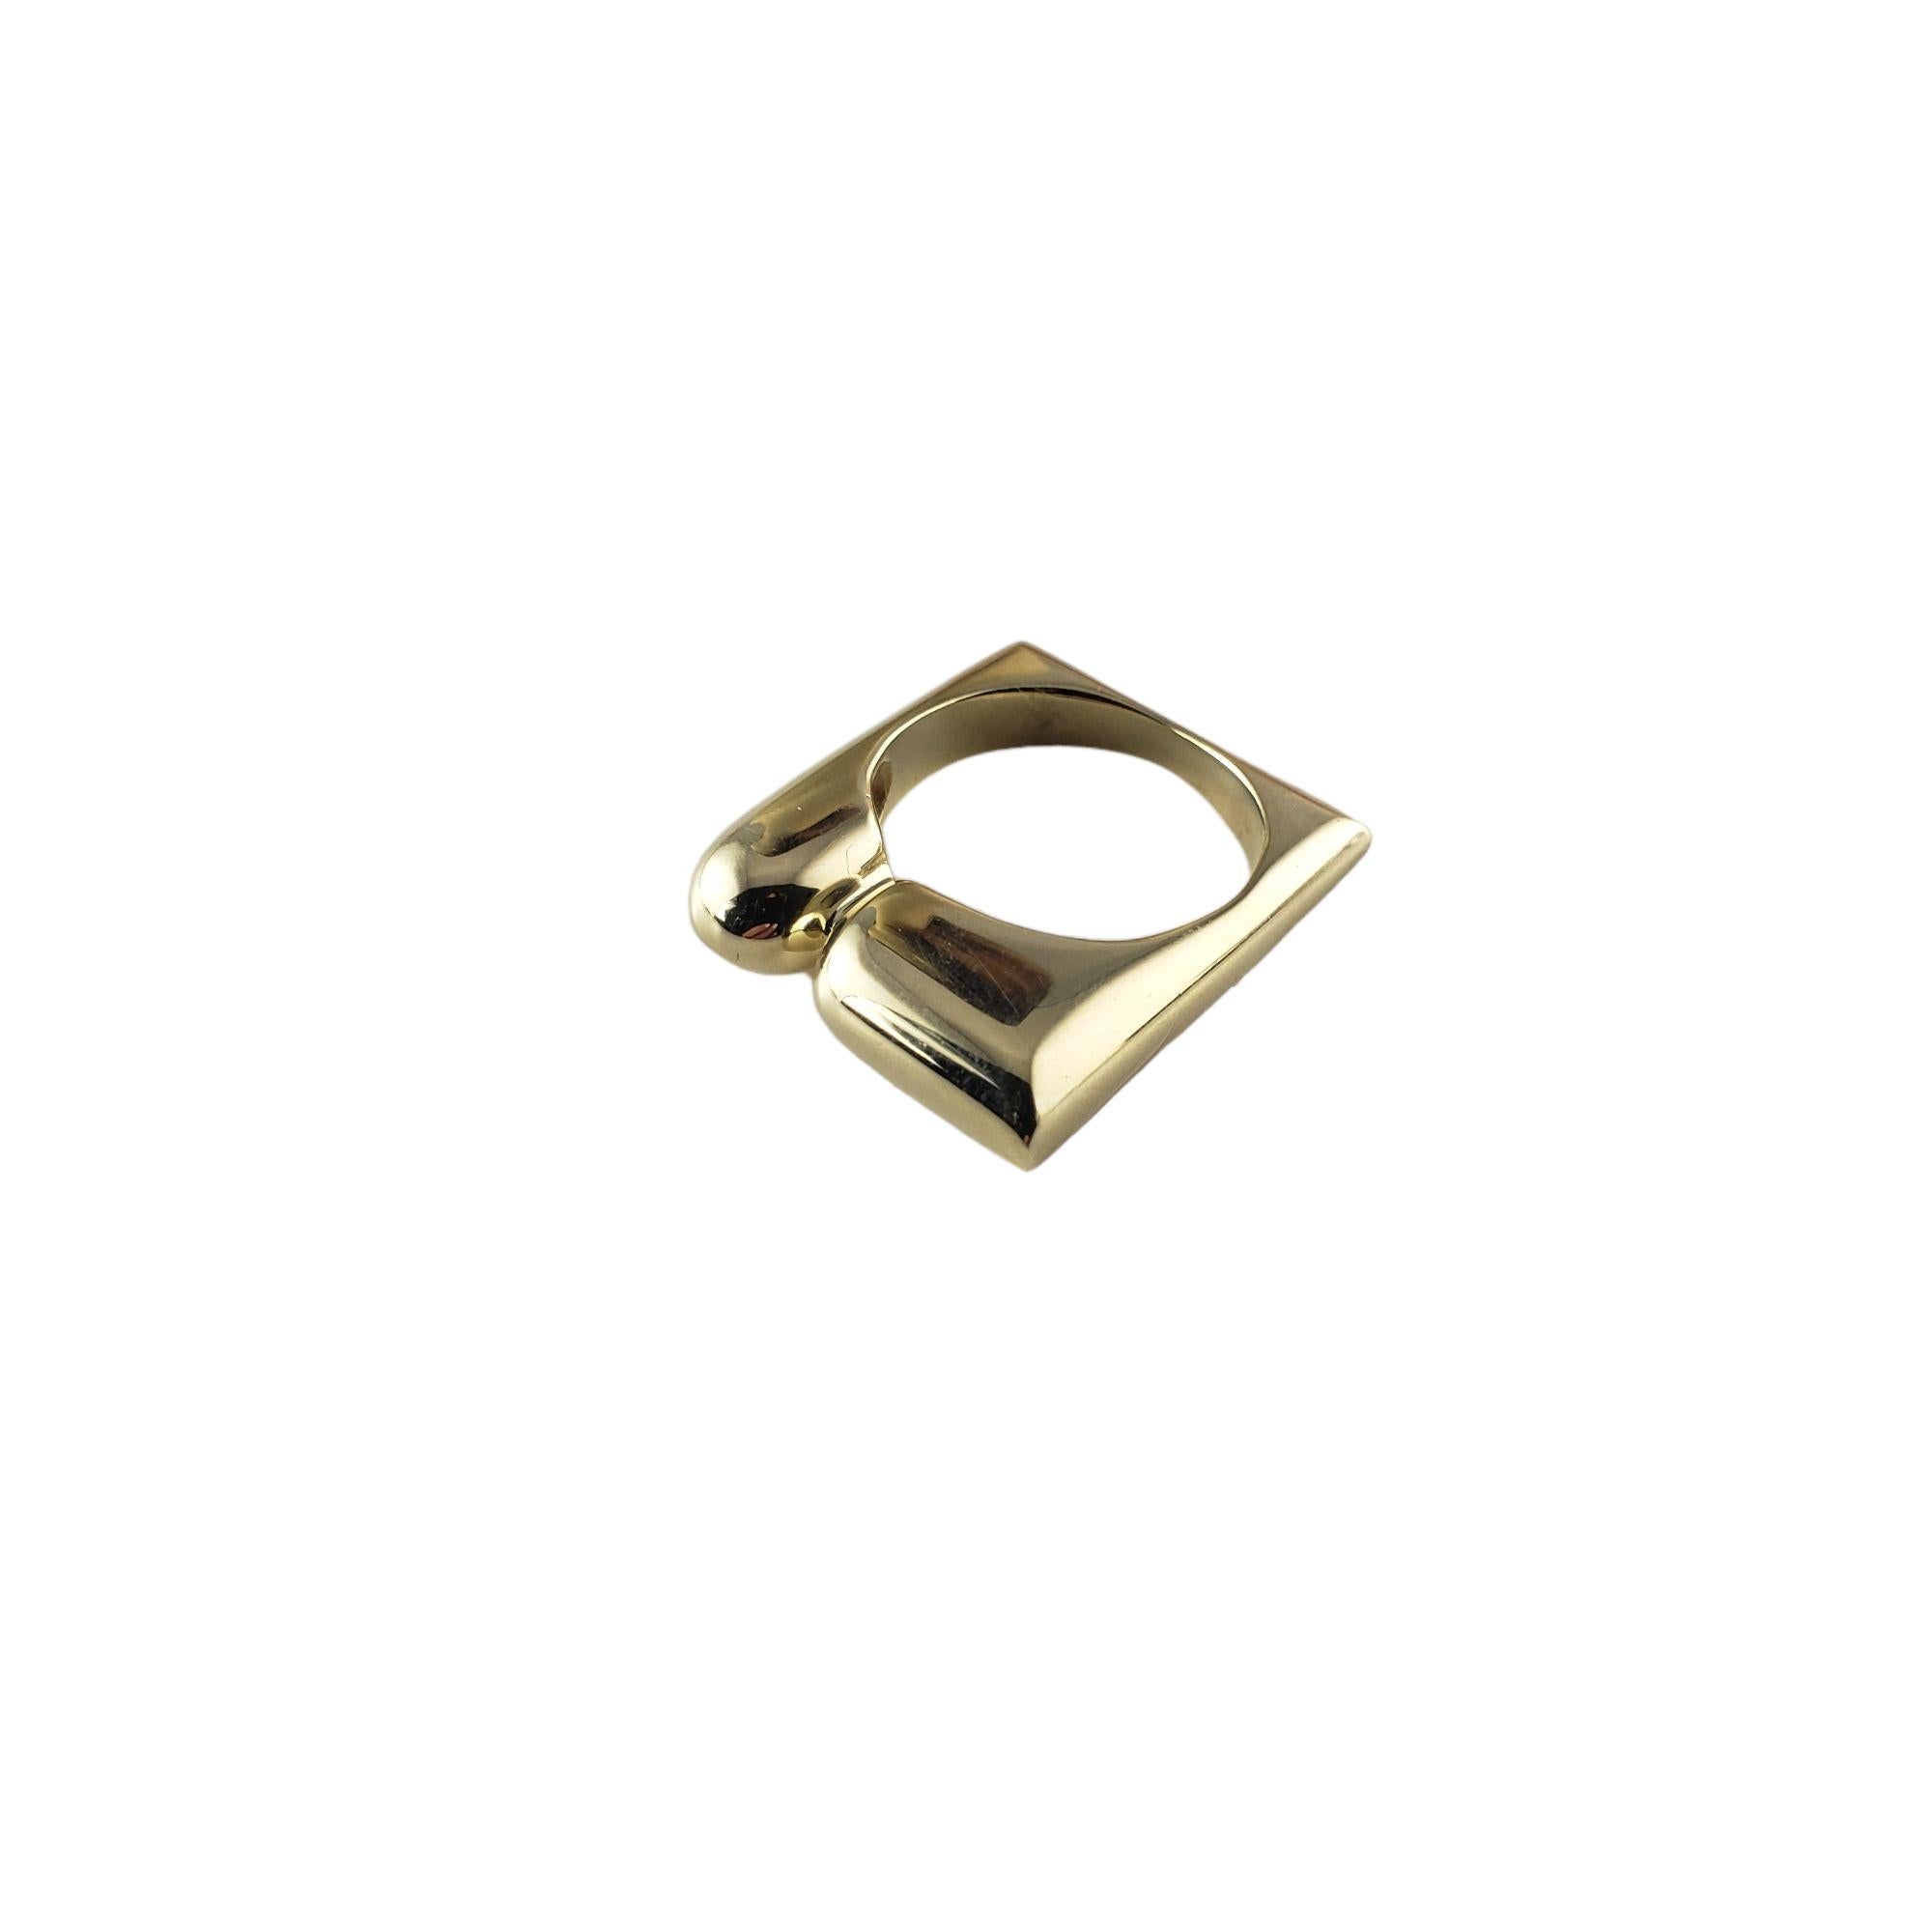 Vintage 14 Karat Yellow Gold Square Ring Size 4.5-

This unique square ring is crafted in meticulously detailed 14K yellow gold. Width: 6 mm. Shank: 2 mm.

Ring Size: 4.5

Weight: 8.9 gr./ 5.8 dwt.

Stamped: 14K

Very good condition, professionally